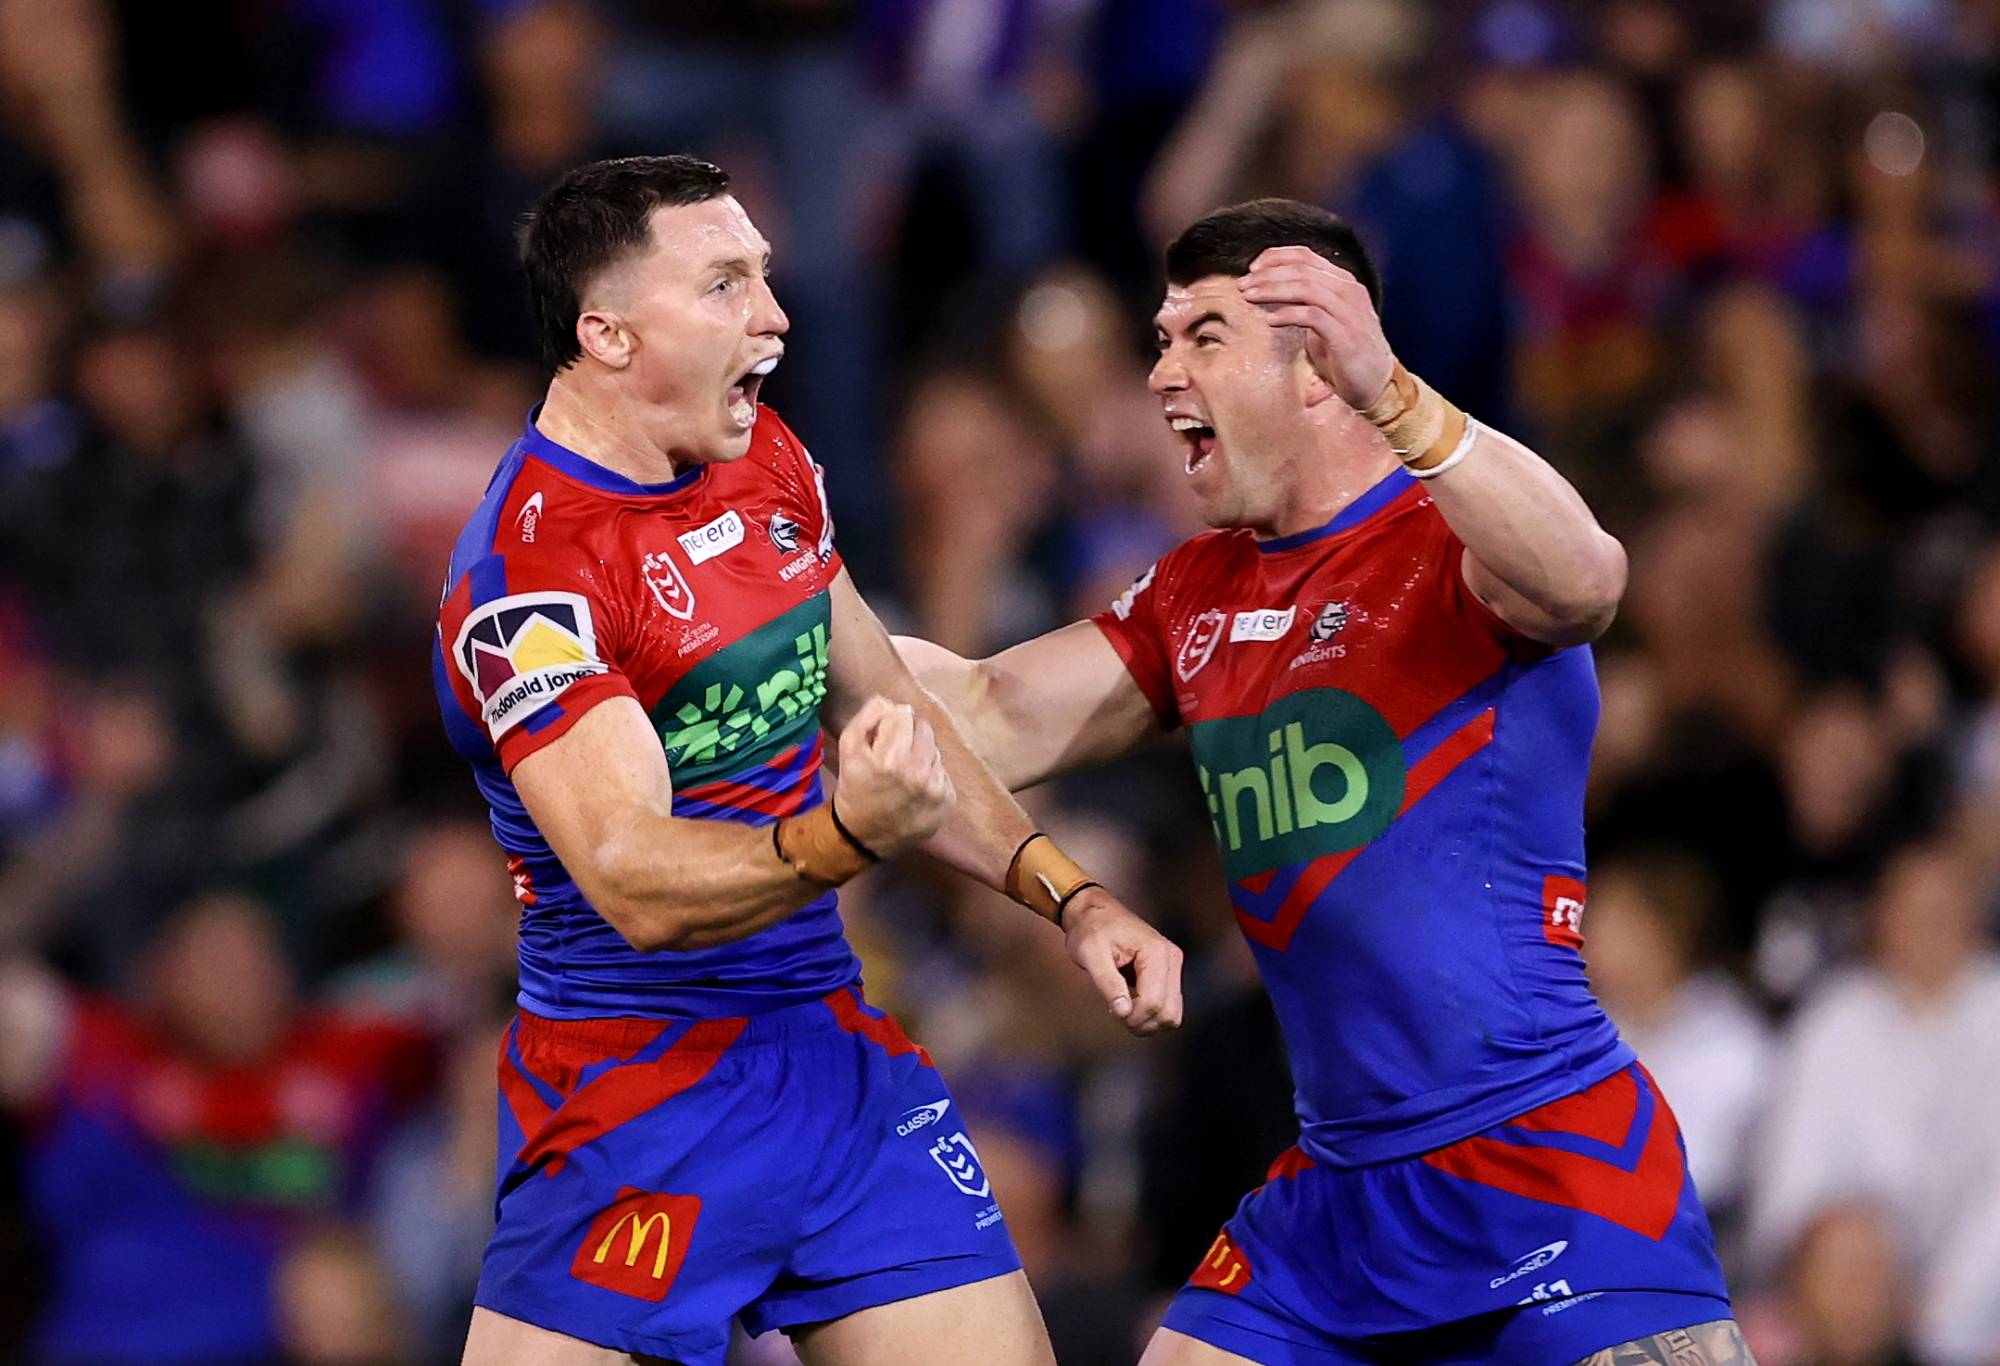 NEWCASTLE, AUSTRALIA - APRIL 15: Tyson Gamble of the Knights celebrates after kicking a field goalduring the round seven NRL match between Newcastle Knights and Penrith Panthers at McDonald Jones Stadium on April 15, 2023 in Newcastle, Australia. (Photo by Brendon Thorne/Getty Images)